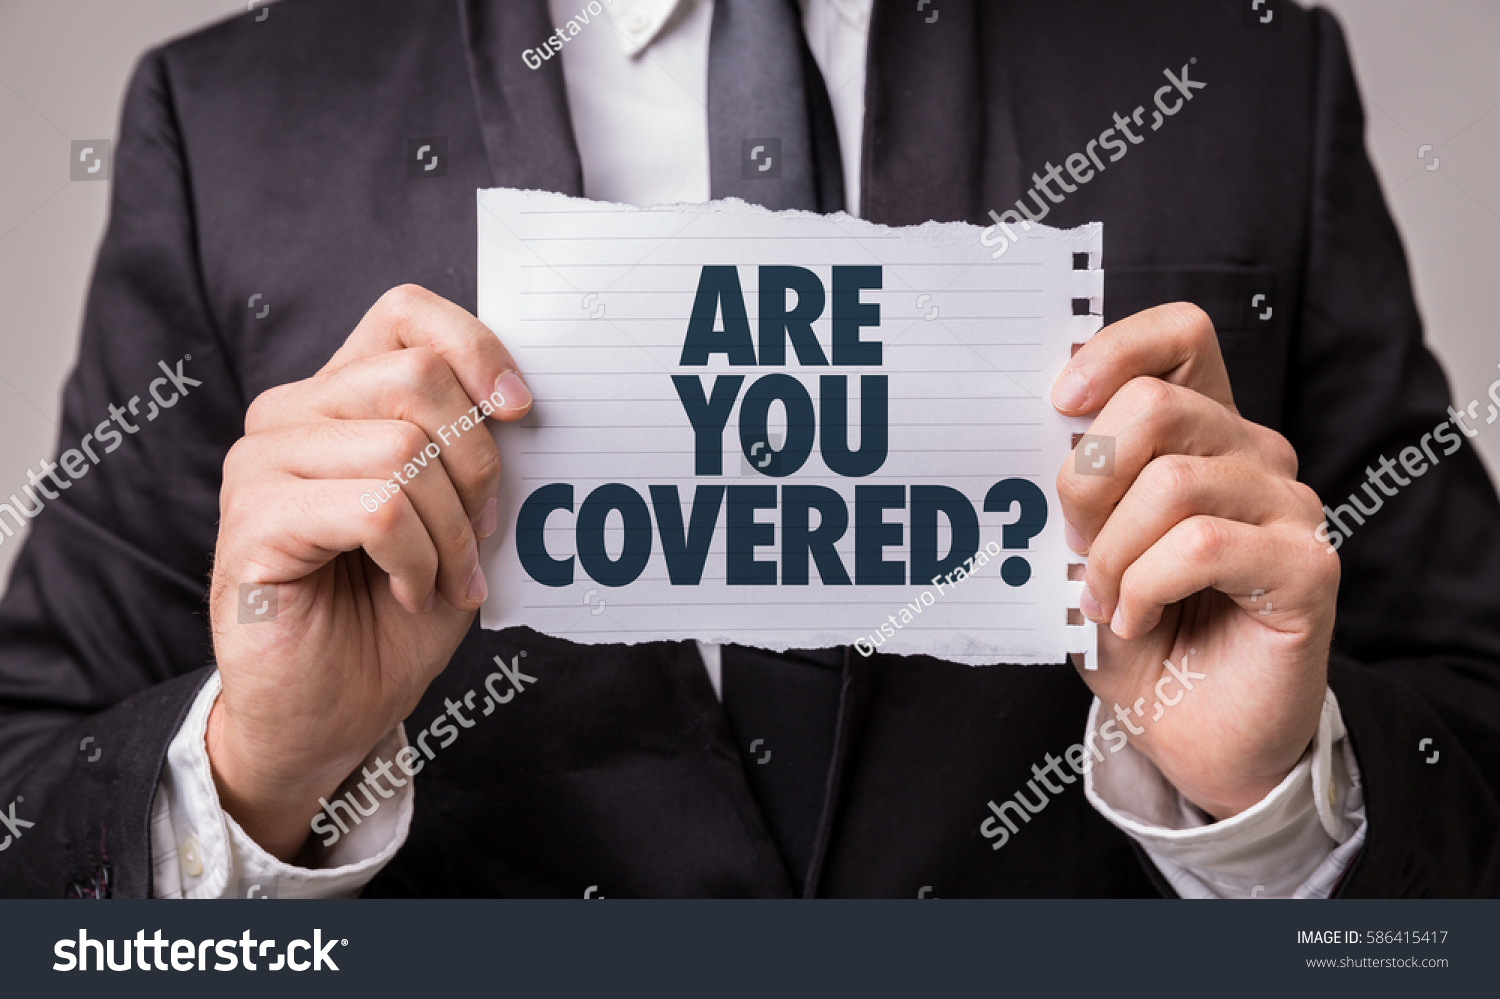 Are You Covered? #586415417